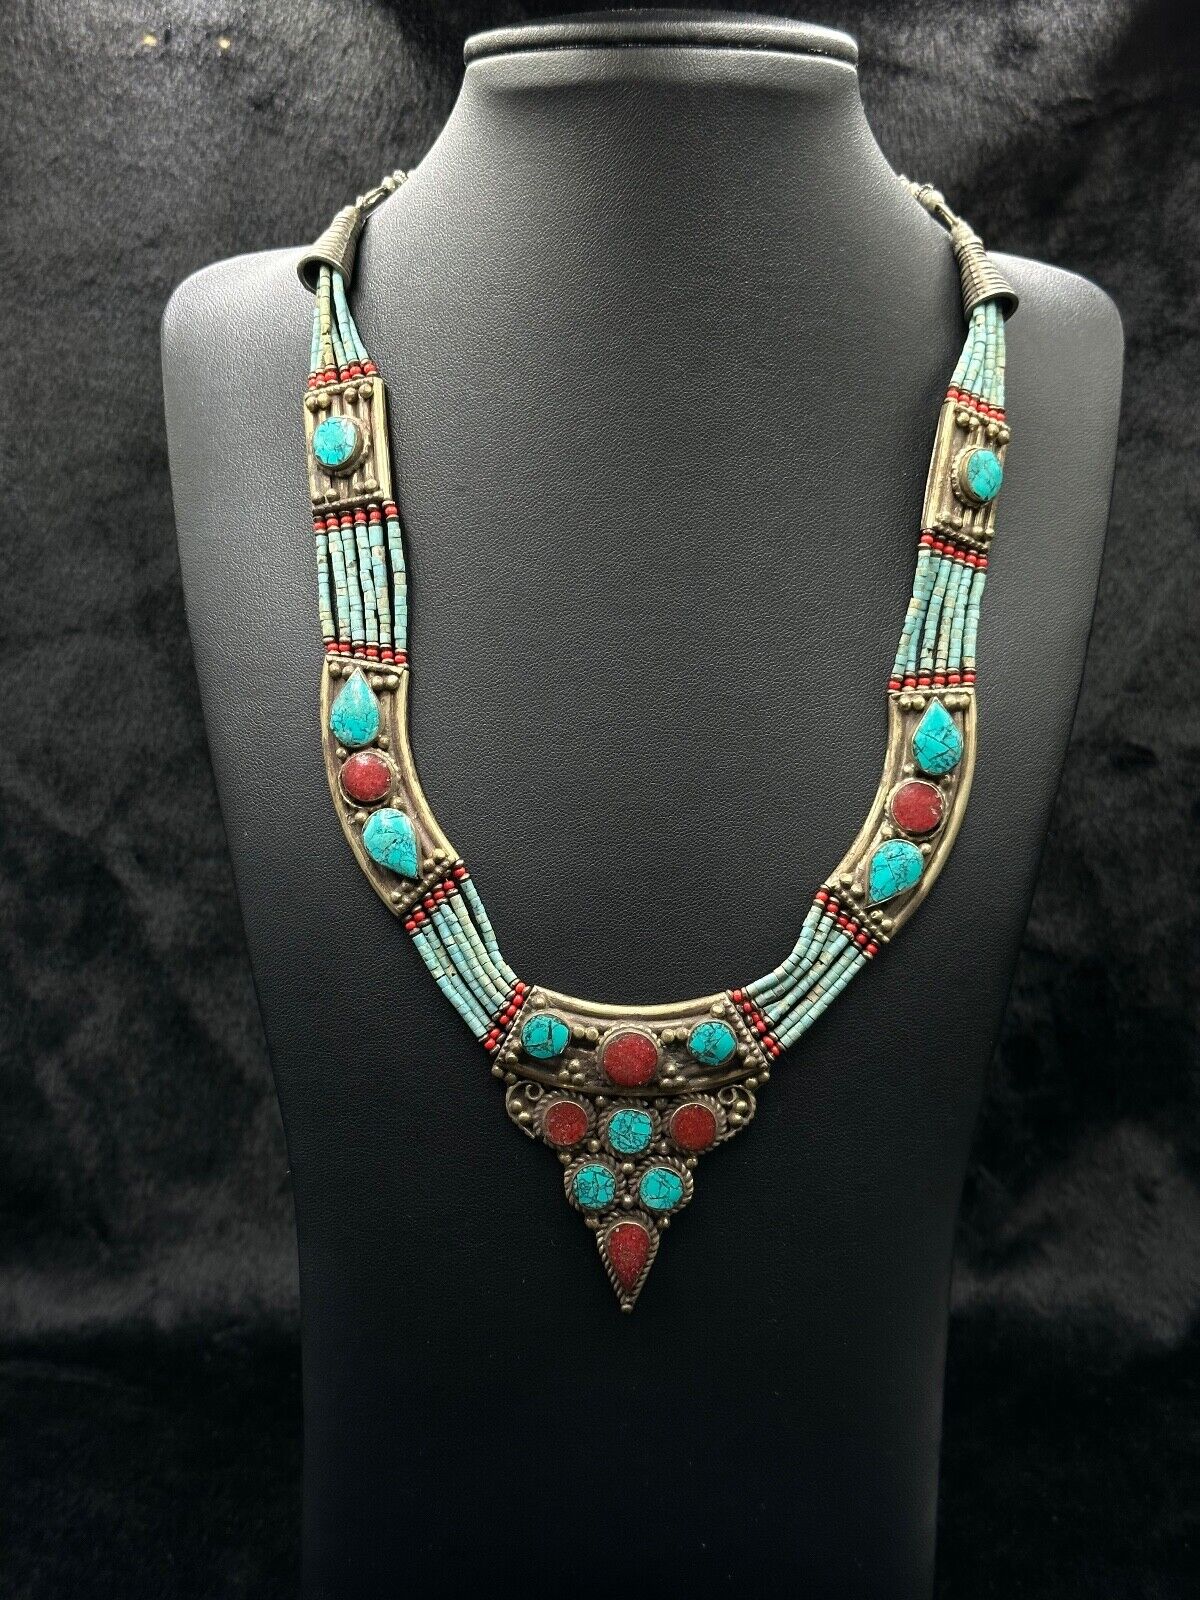 Vintage Nepali Tibetan Beautiful Design Necklace With Turquoise And Coral Stone